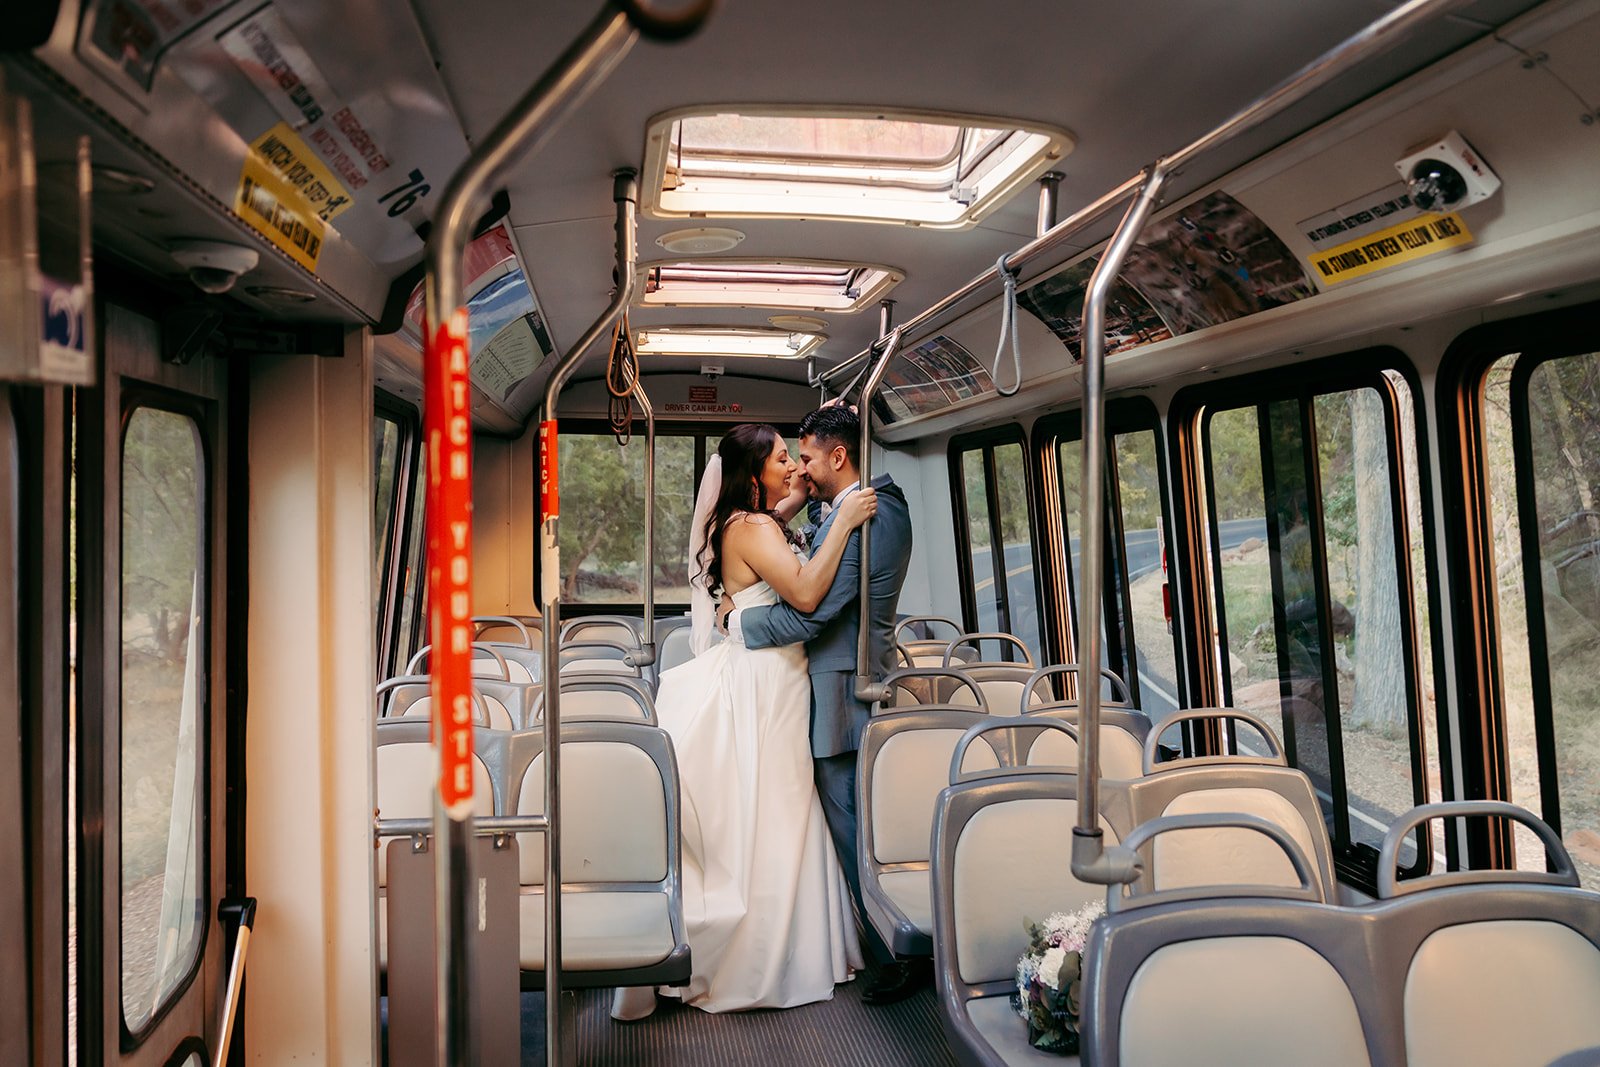  Bride and Groom kissing in a shuttle bus  